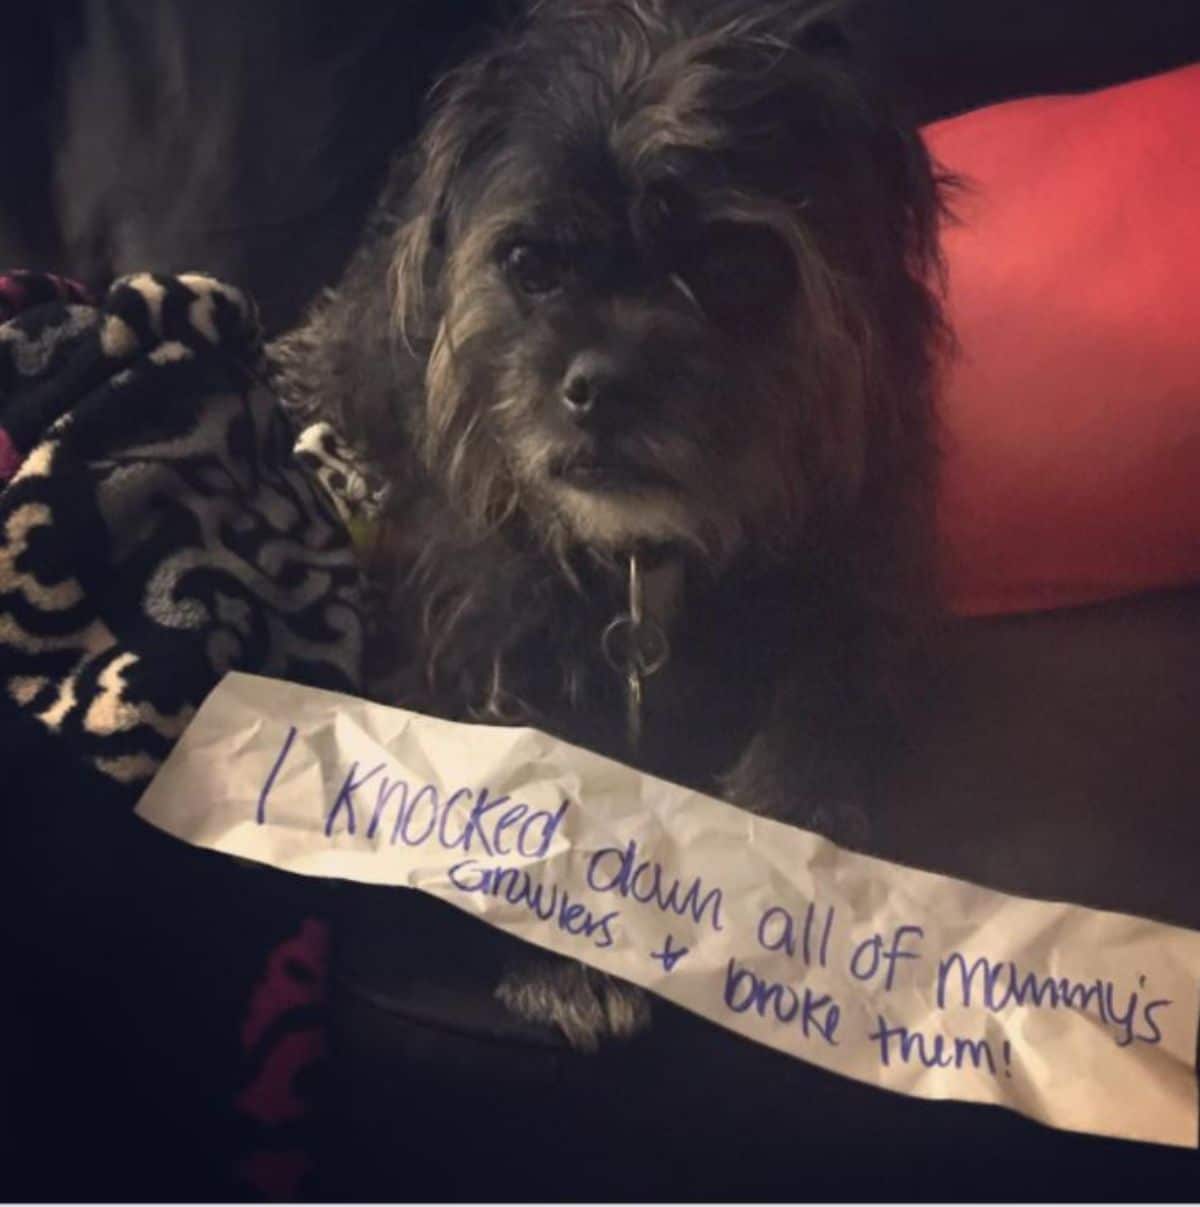 fluffy black dog on a brown sofa with a note saying i knocked down all of mommy's growlers and broke them